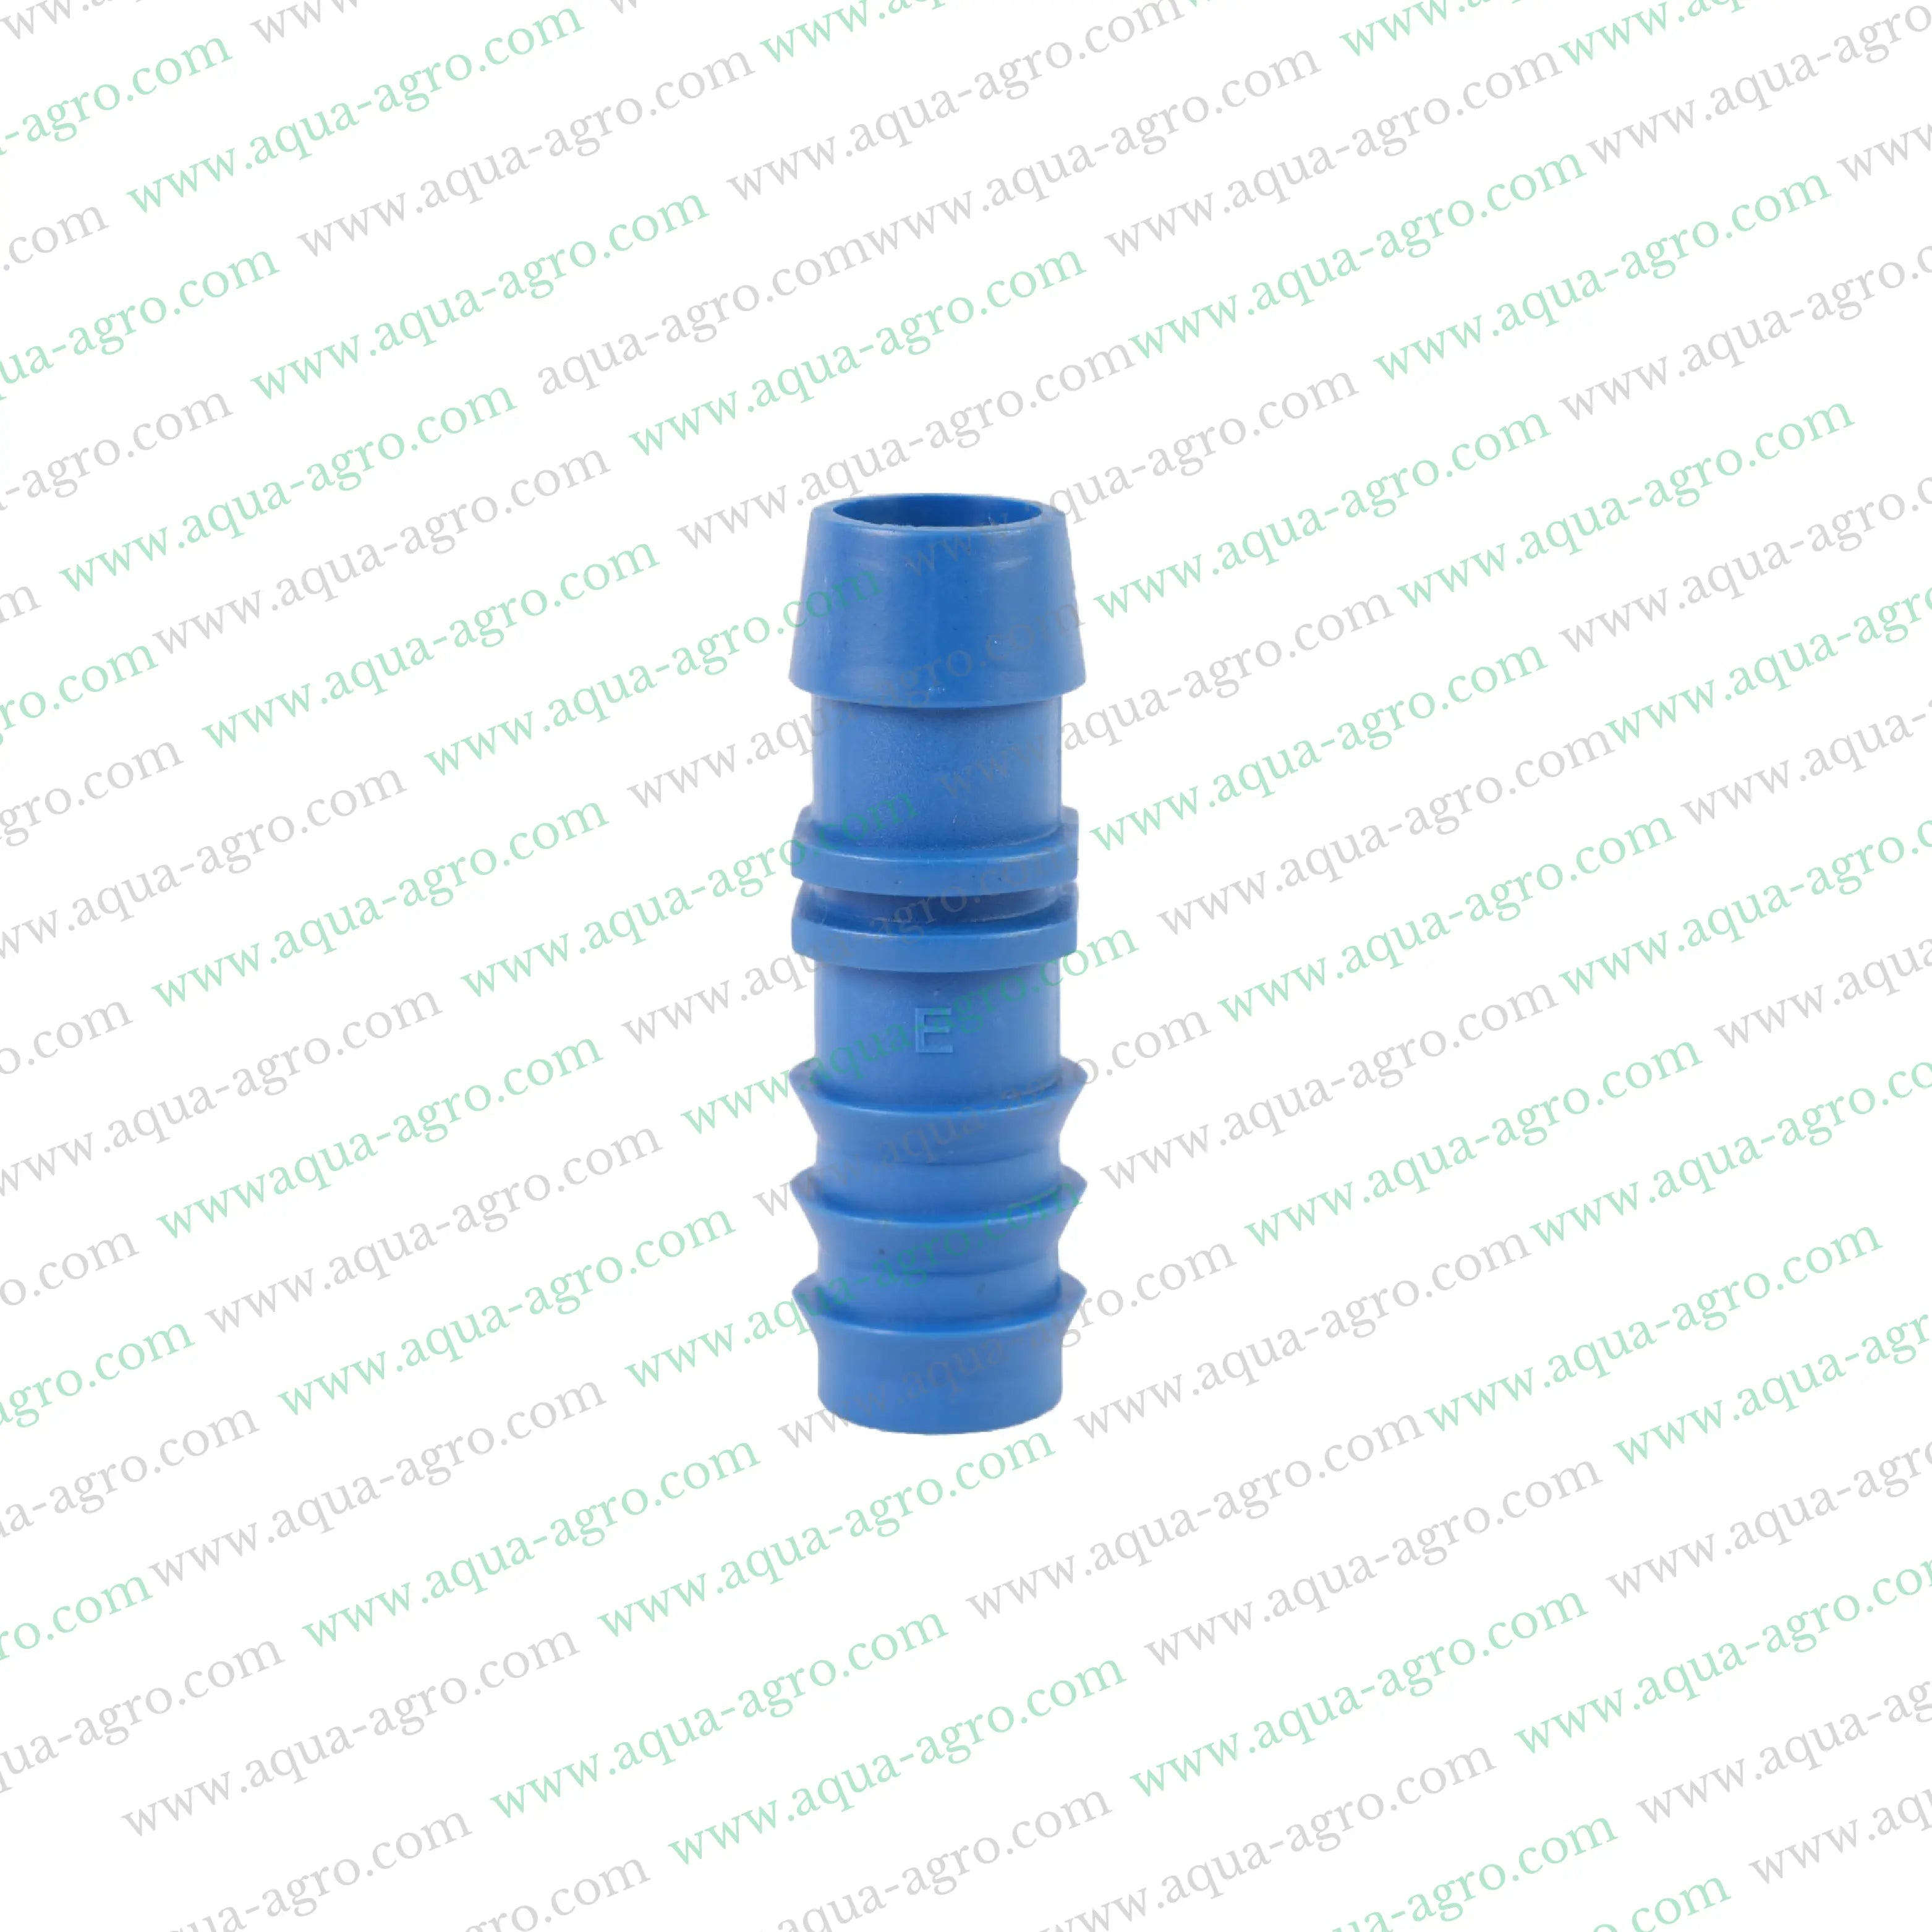 AQUA - AGRO | Drip Fittings And Accessories - Barbed Fittings - Lite - Start Connector - 16mm - Neta type